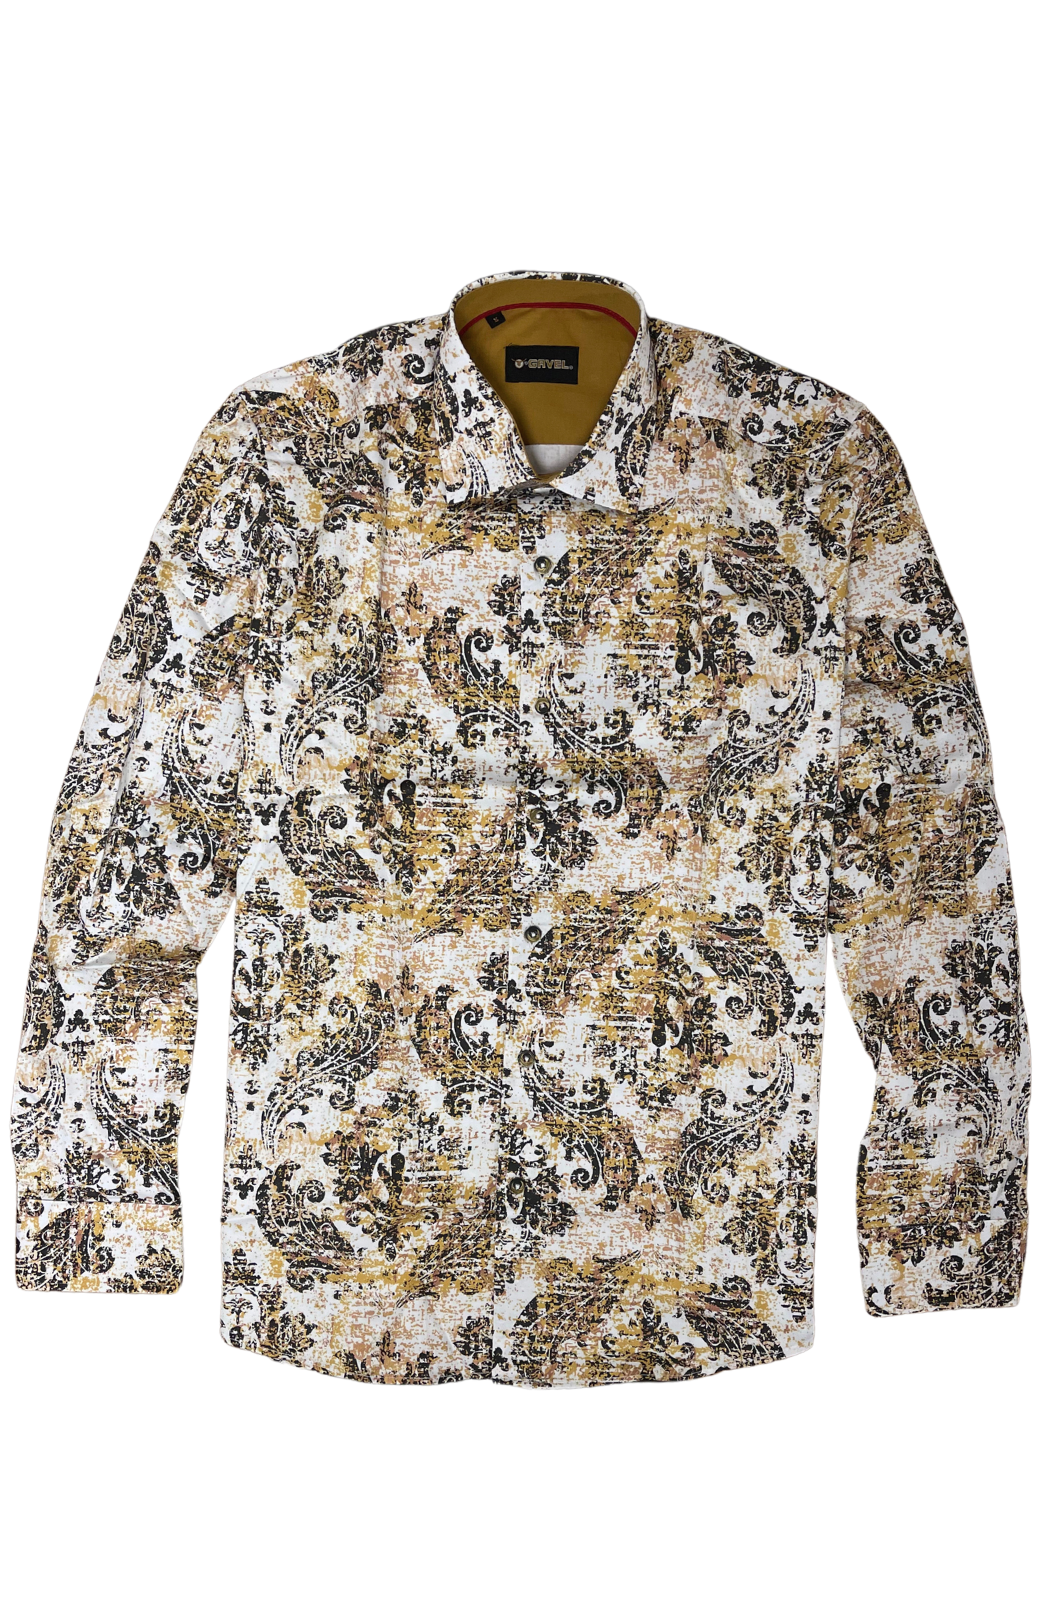 RODEO WESTERN SHIRTS: BROWN WHITE PAISLEY